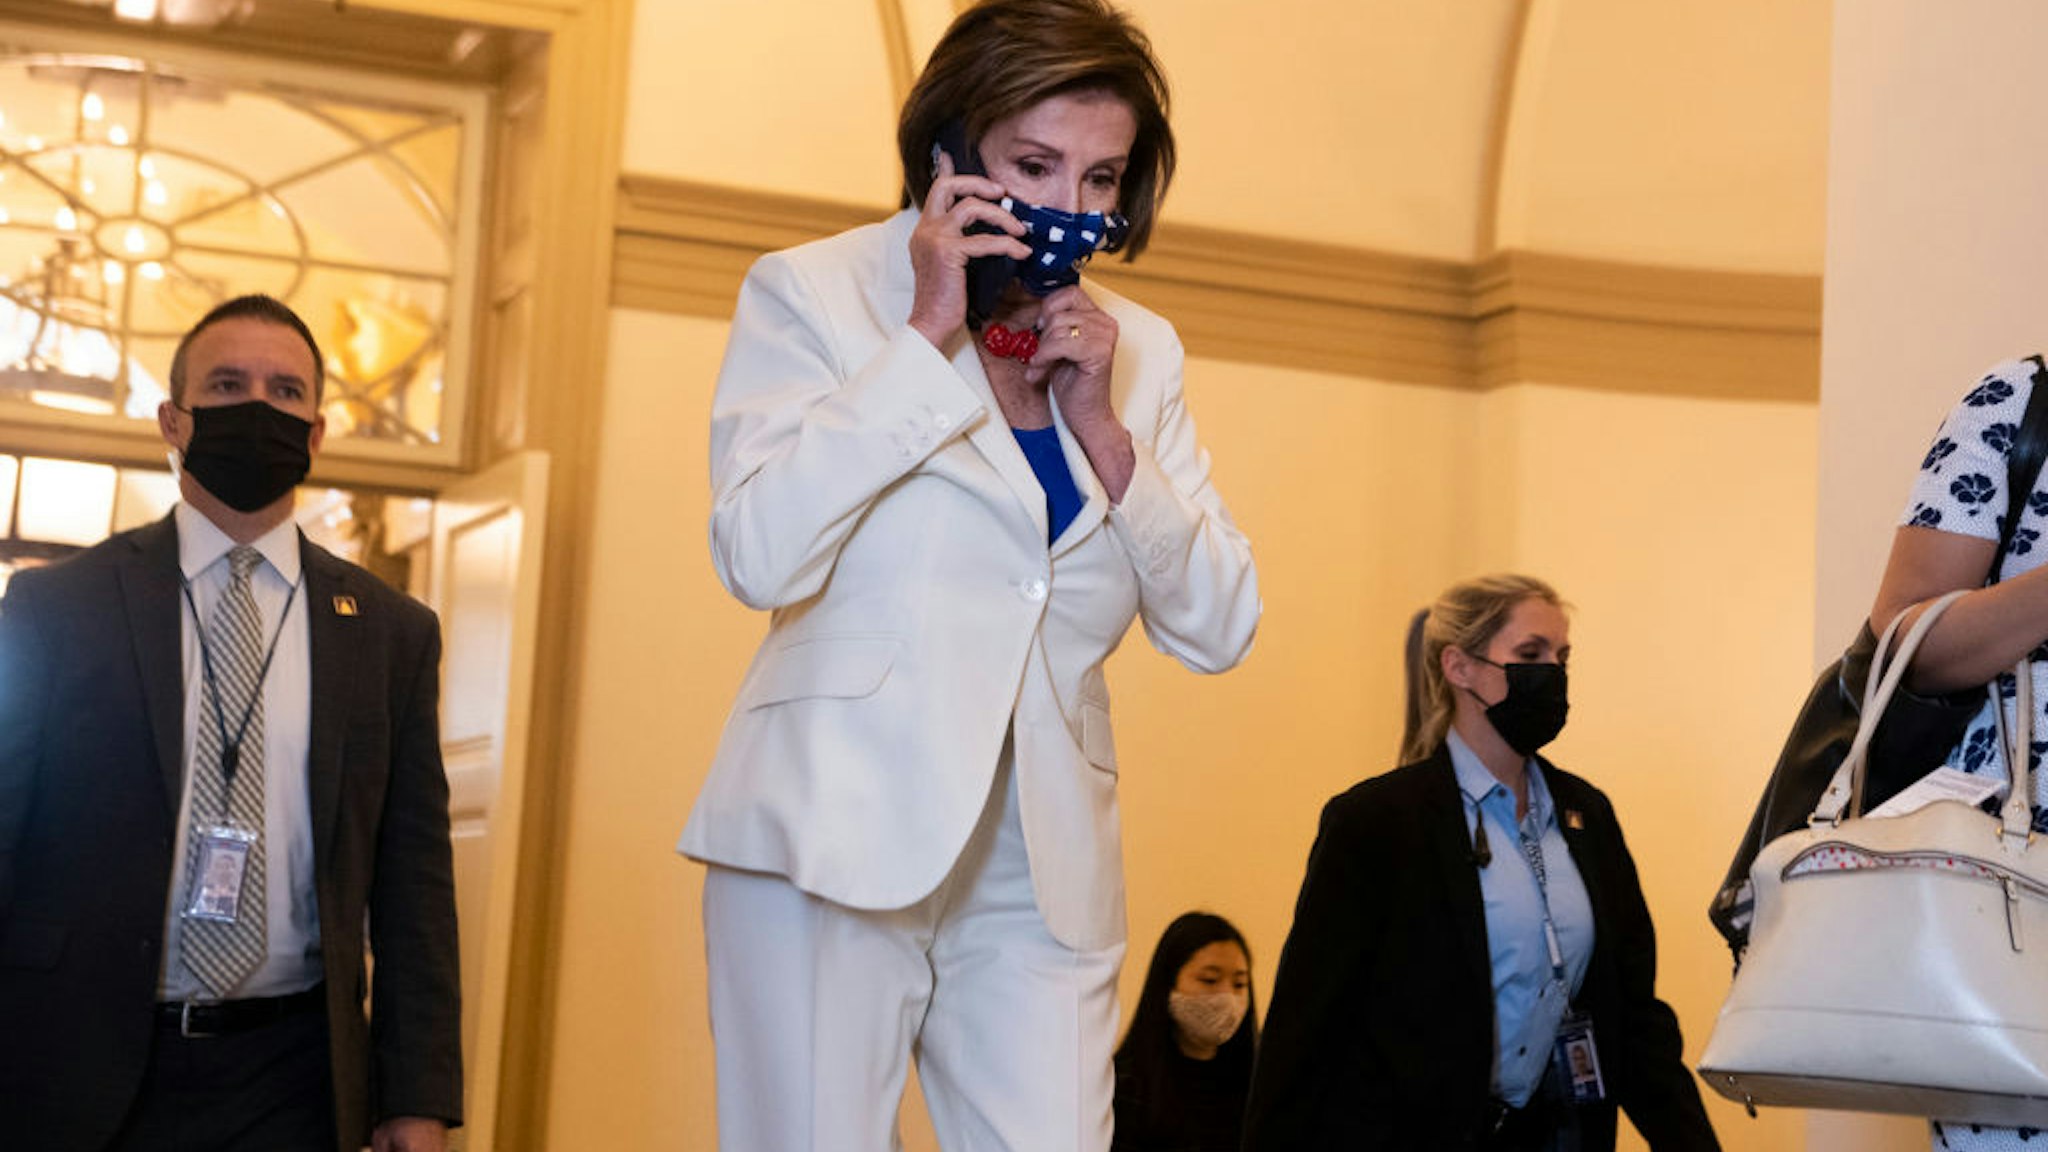 UNITED STATES - MAY 20: Speaker of the House Nancy Pelosi, D-Calif., arrives to the Capitol on Thursday, May 20, 2021. (Photo By Tom Williams/CQ-Roll Call, Inc via Getty Images)